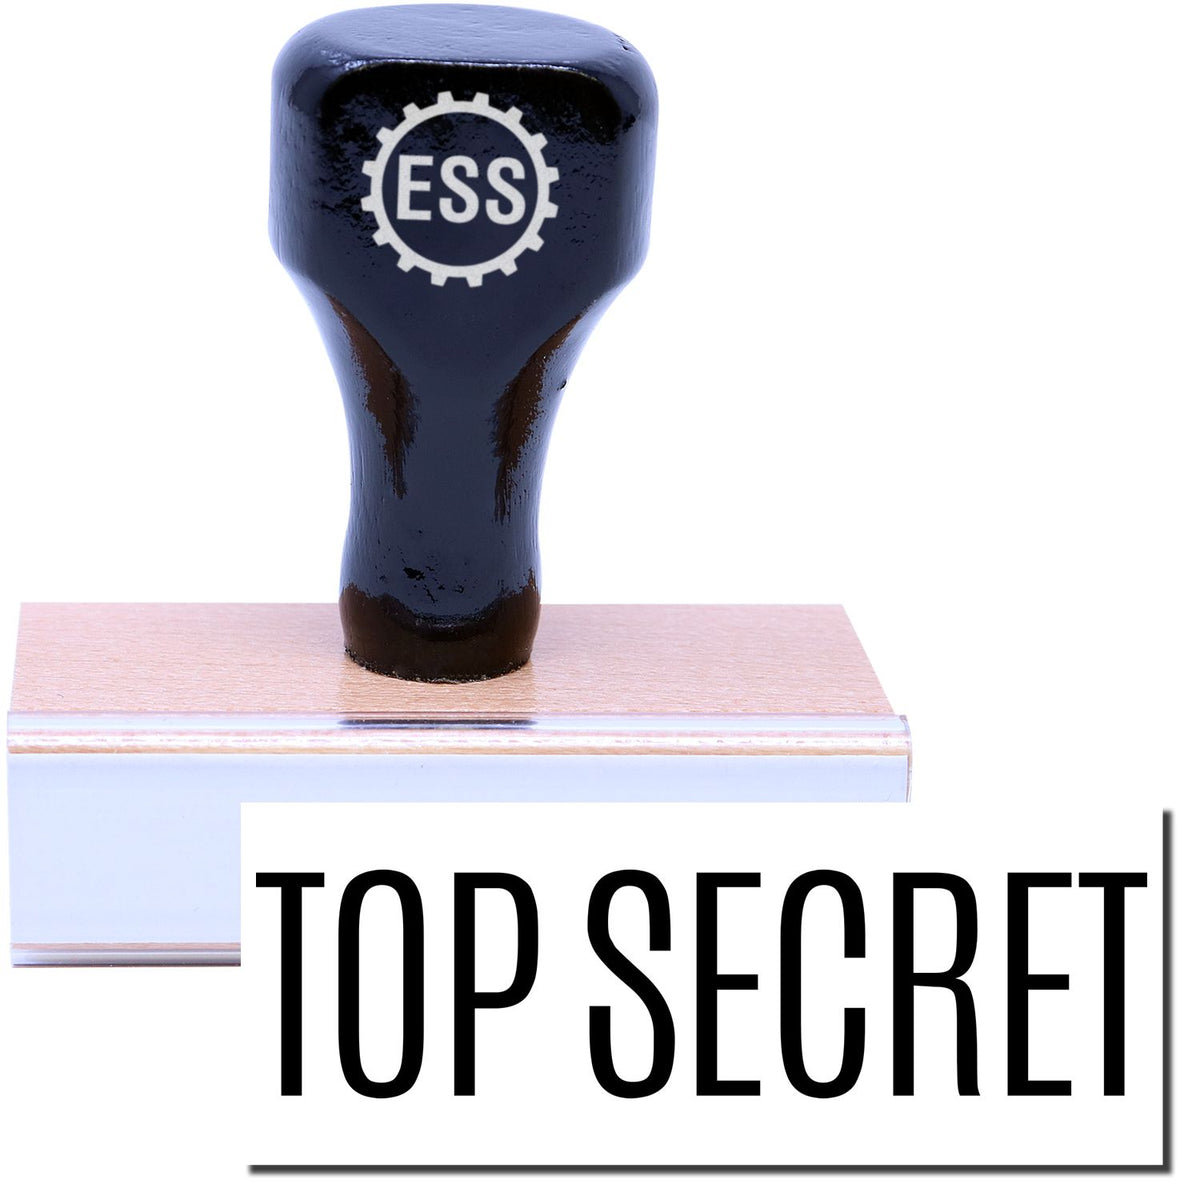 A stock office rubber stamp with a stamped image showing how the text &quot;TOP SECRET&quot; in a large font is displayed after stamping.